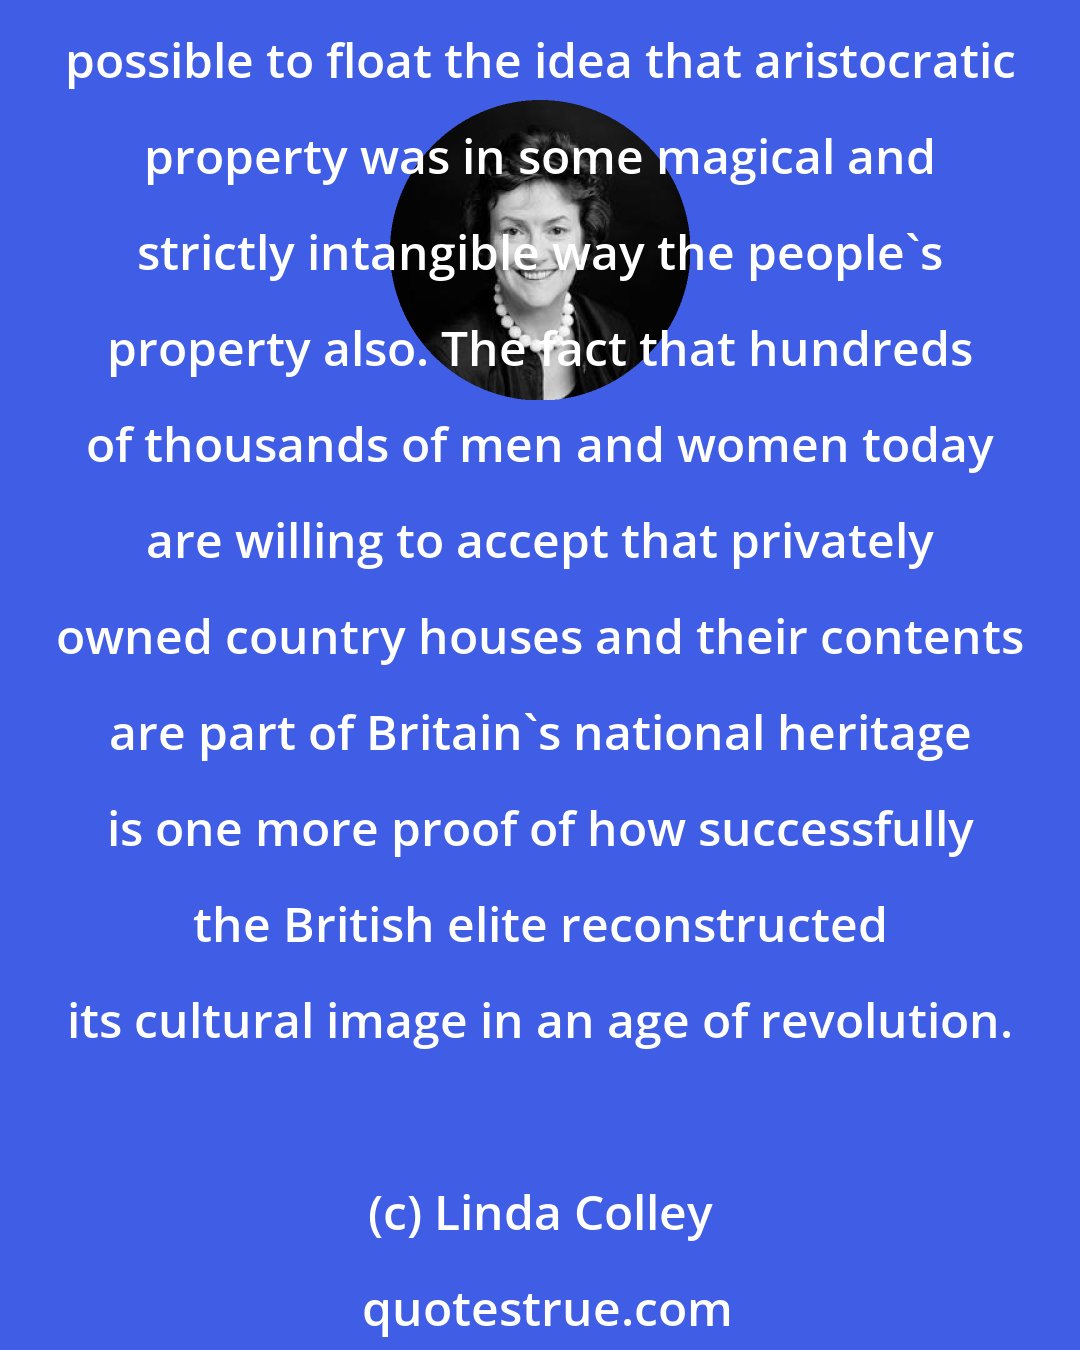 Linda Colley: In virtually every Continental state at this time, aristocracies had to live with the risk that their property might be pillaged or confiscated. Only in Great Britain did it prove possible to float the idea that aristocratic property was in some magical and strictly intangible way the people's property also. The fact that hundreds of thousands of men and women today are willing to accept that privately owned country houses and their contents are part of Britain's national heritage is one more proof of how successfully the British elite reconstructed its cultural image in an age of revolution.